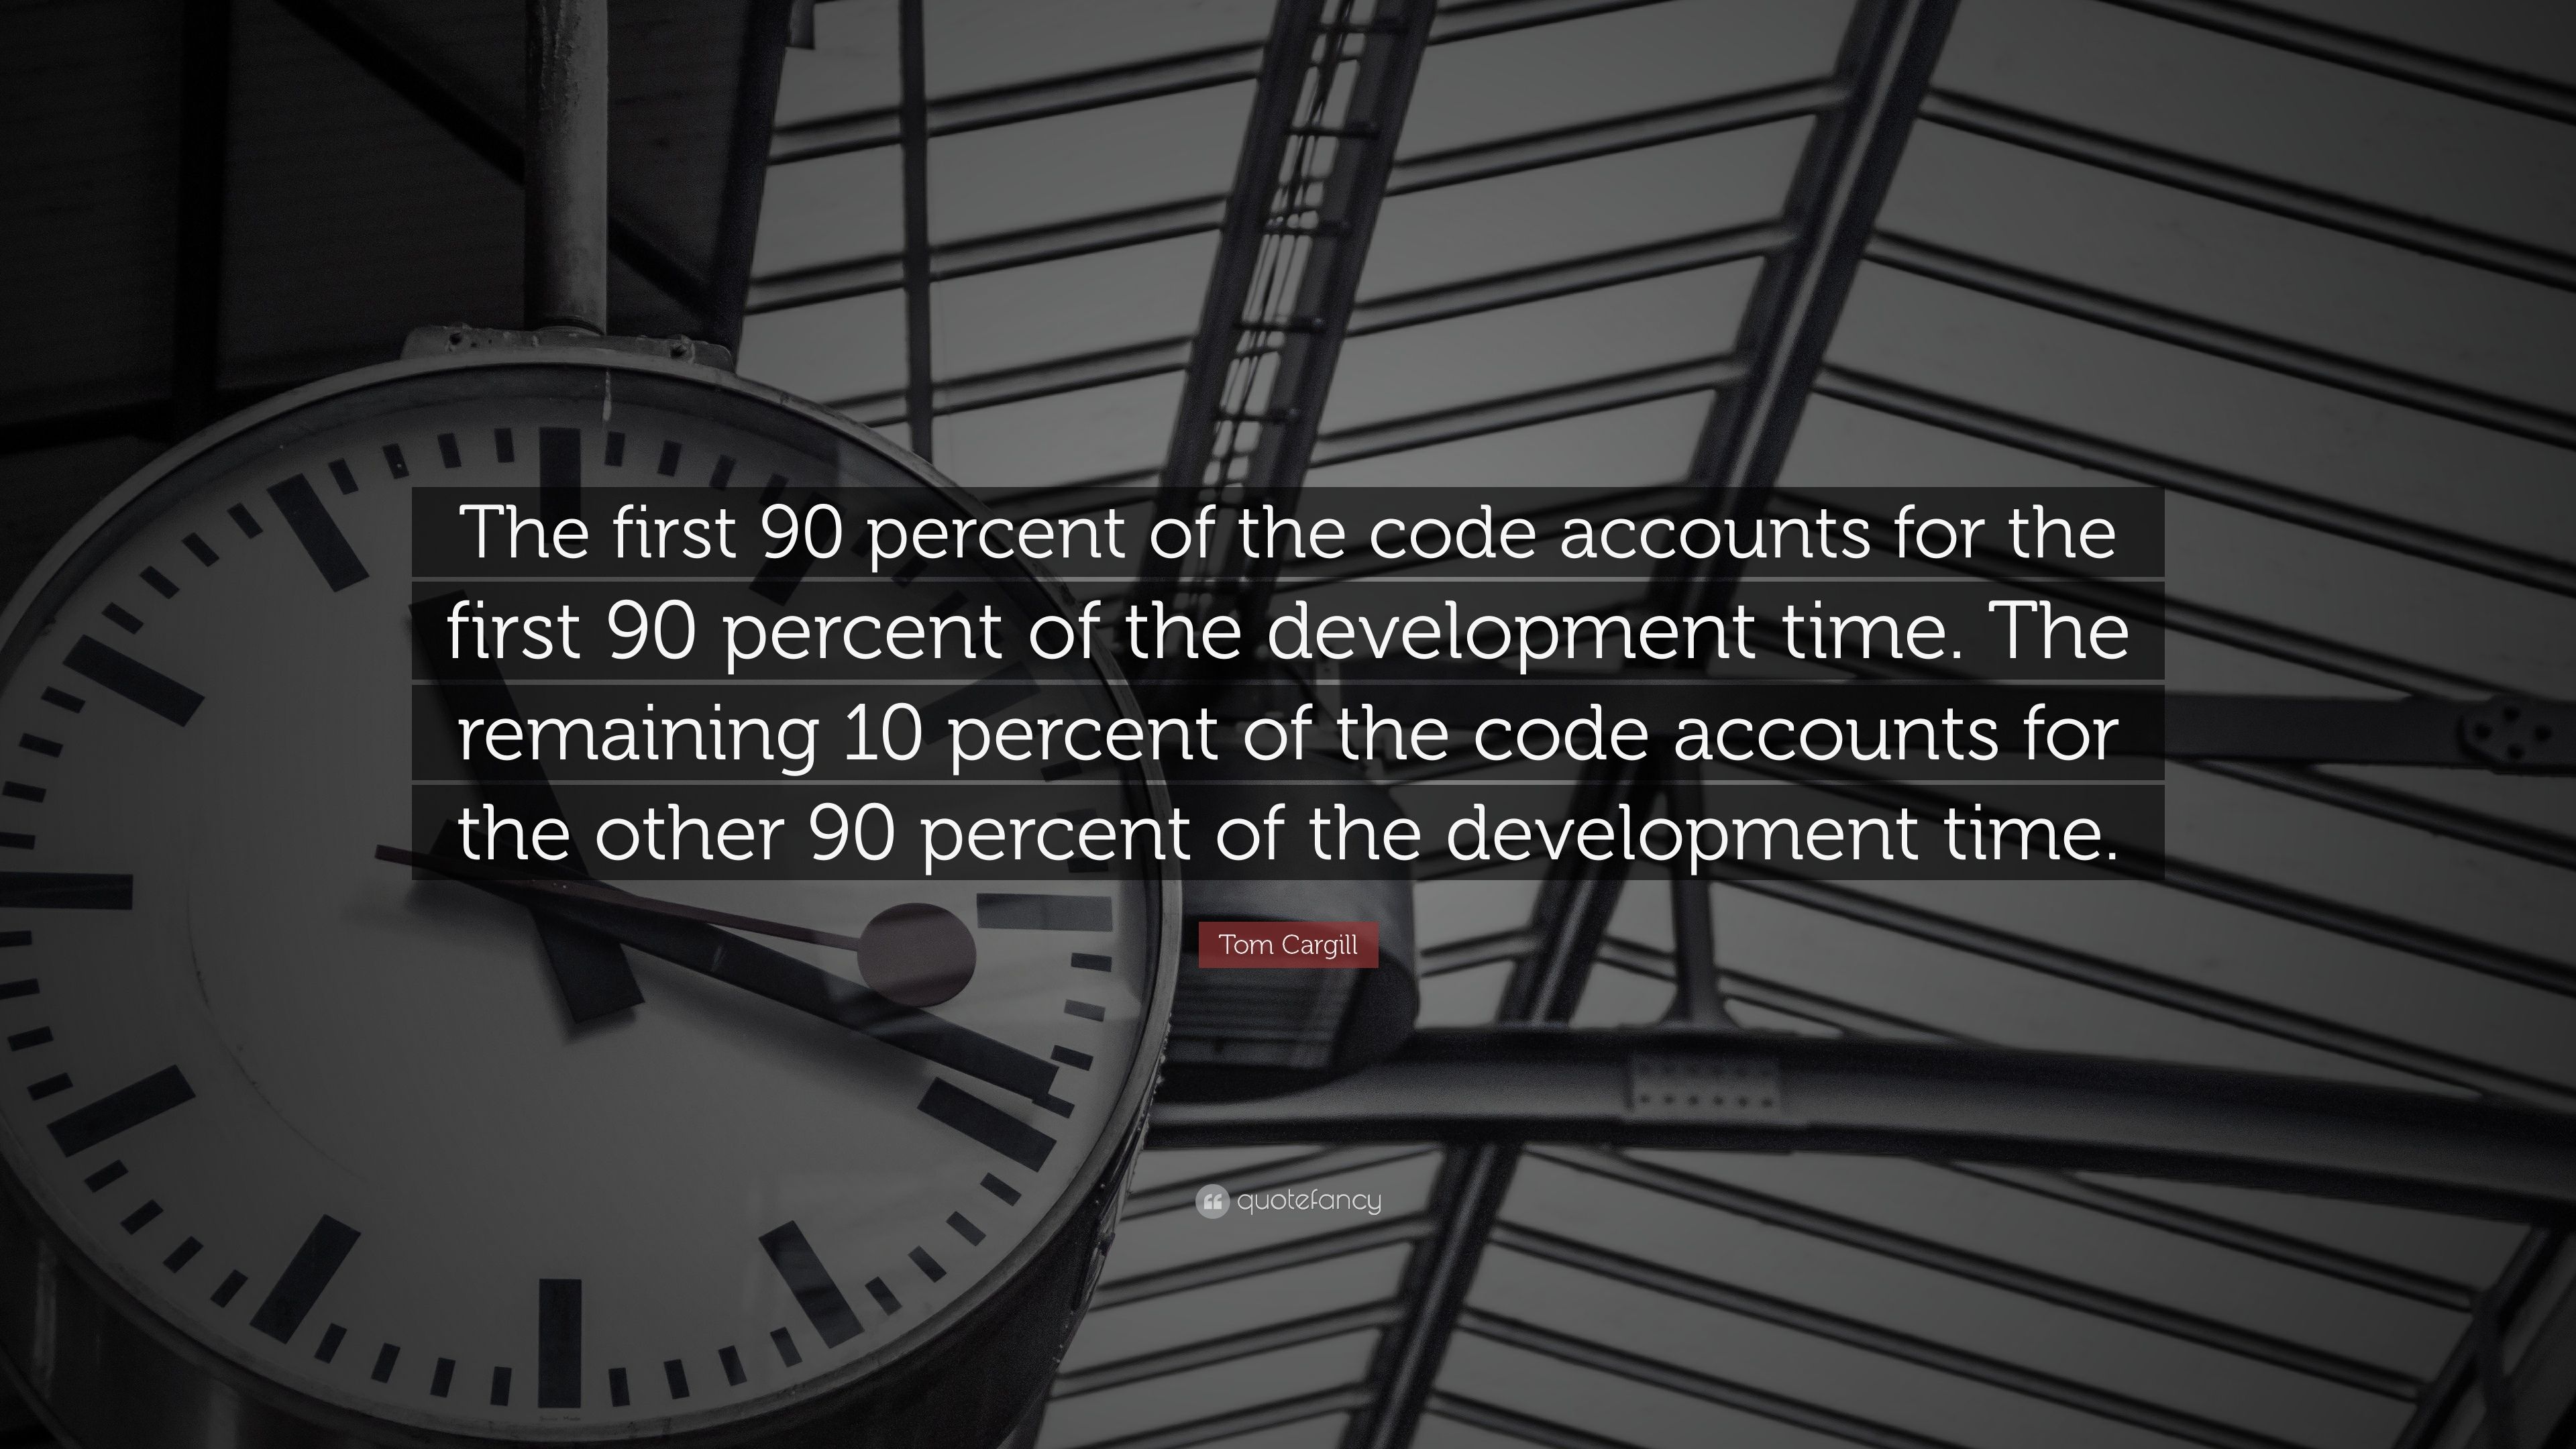 Tom Cargill Quote: “The first 90 percent of the code accounts for the first 90 percent of the development time. The remaining 10 percent” (21 wallpaper)